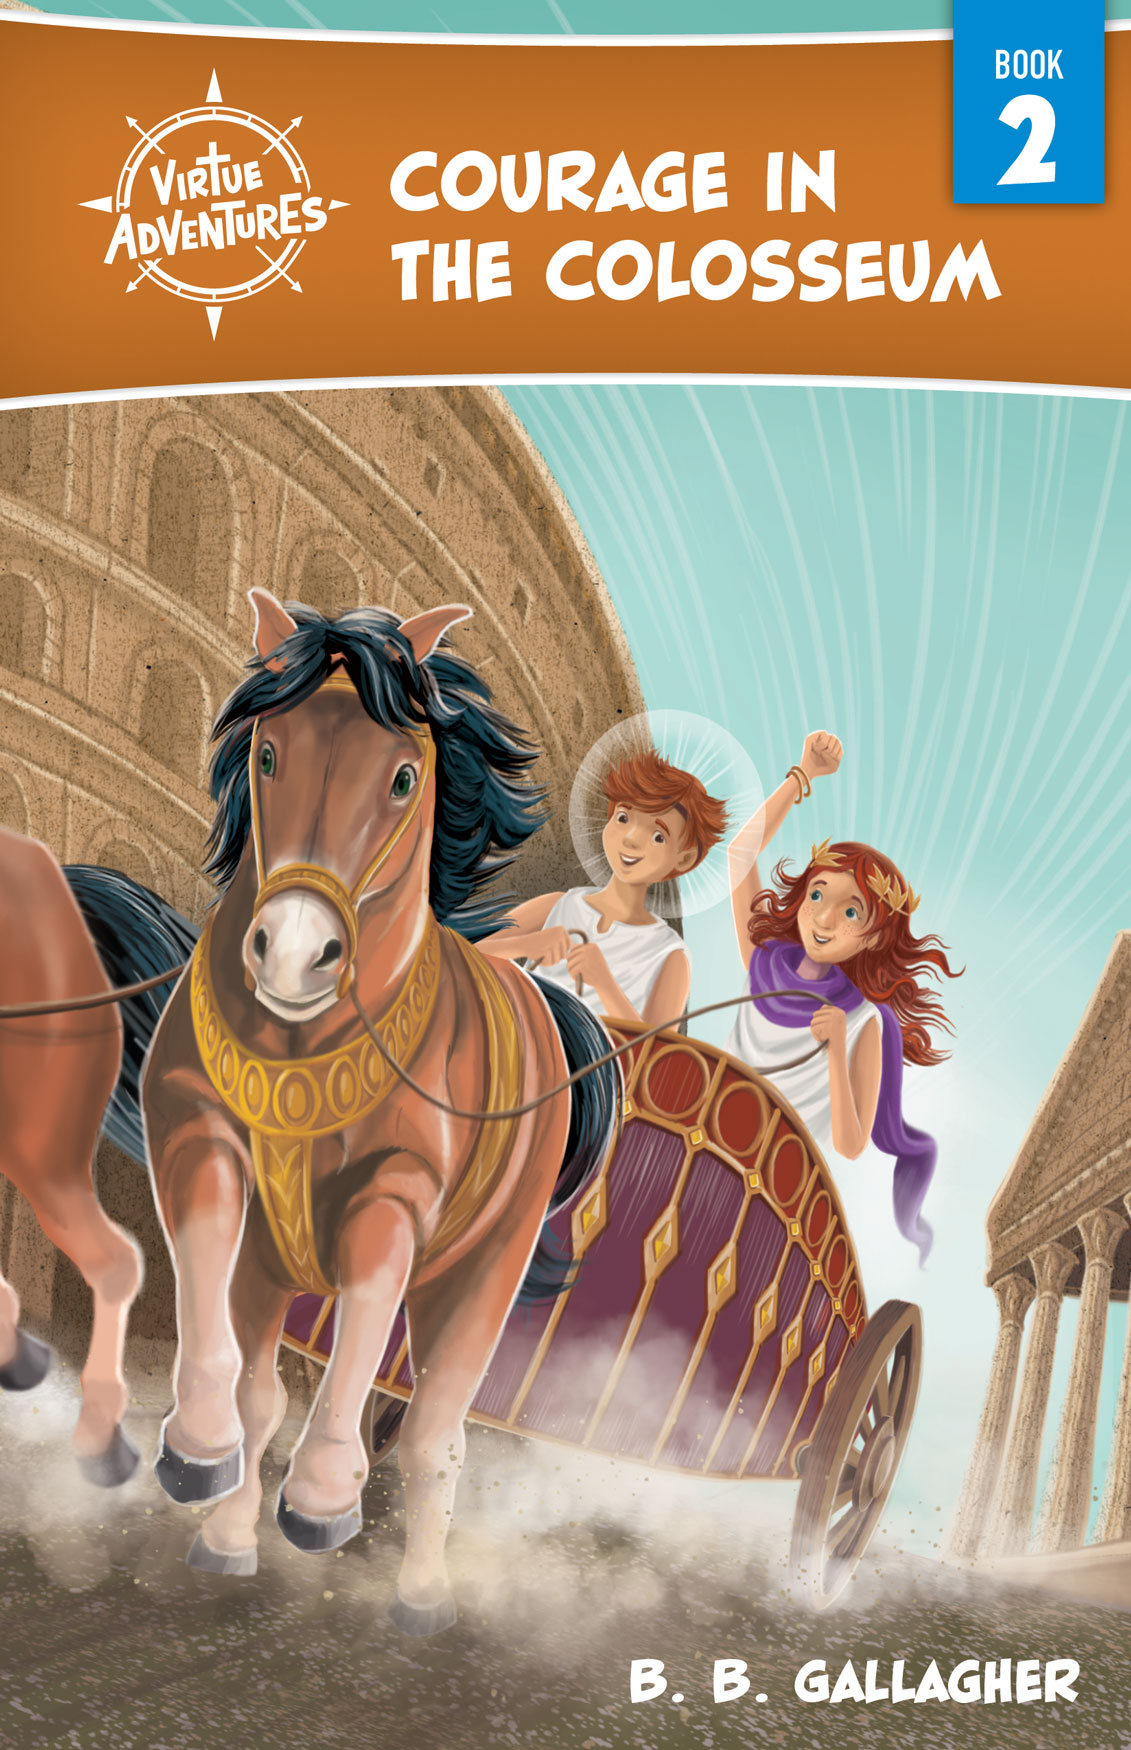 Courage in the Colosseum Virtue Adventures 2 / B B Gallagher